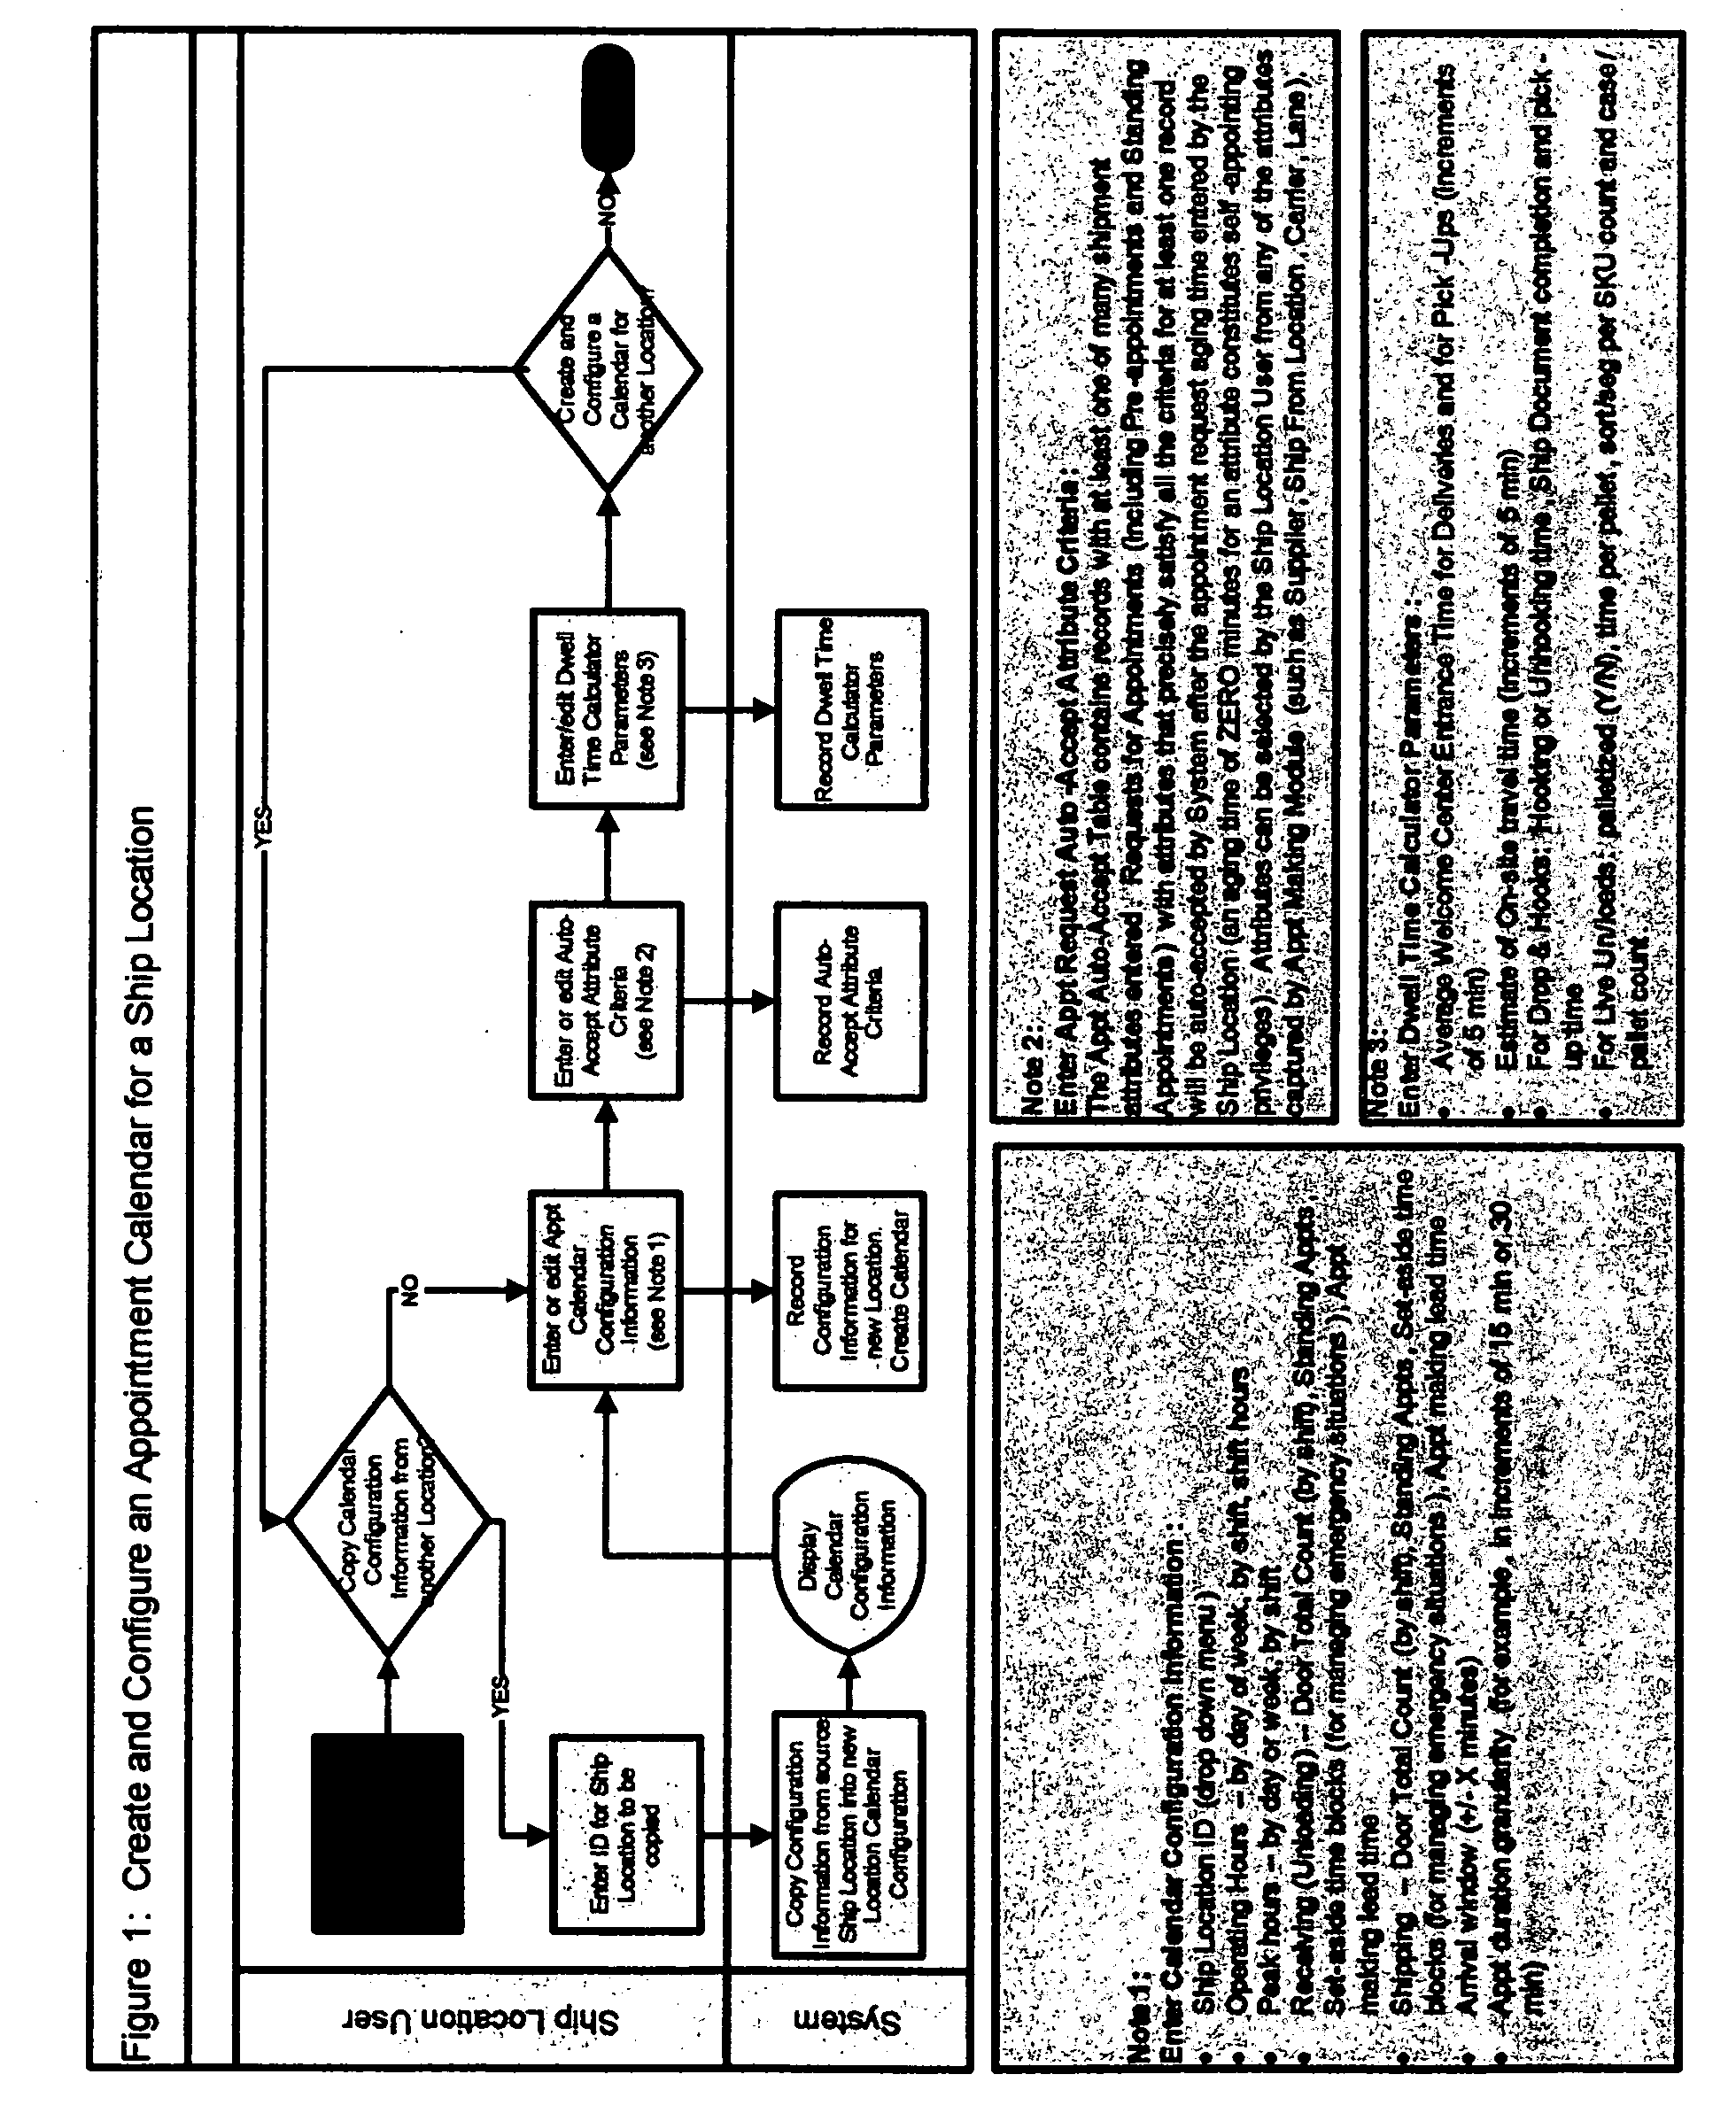 System and method for effectuating the planning and management of shipment pick-up and delivery appointments between buyers, sellers, and transportation and warehousing providers in a supply community